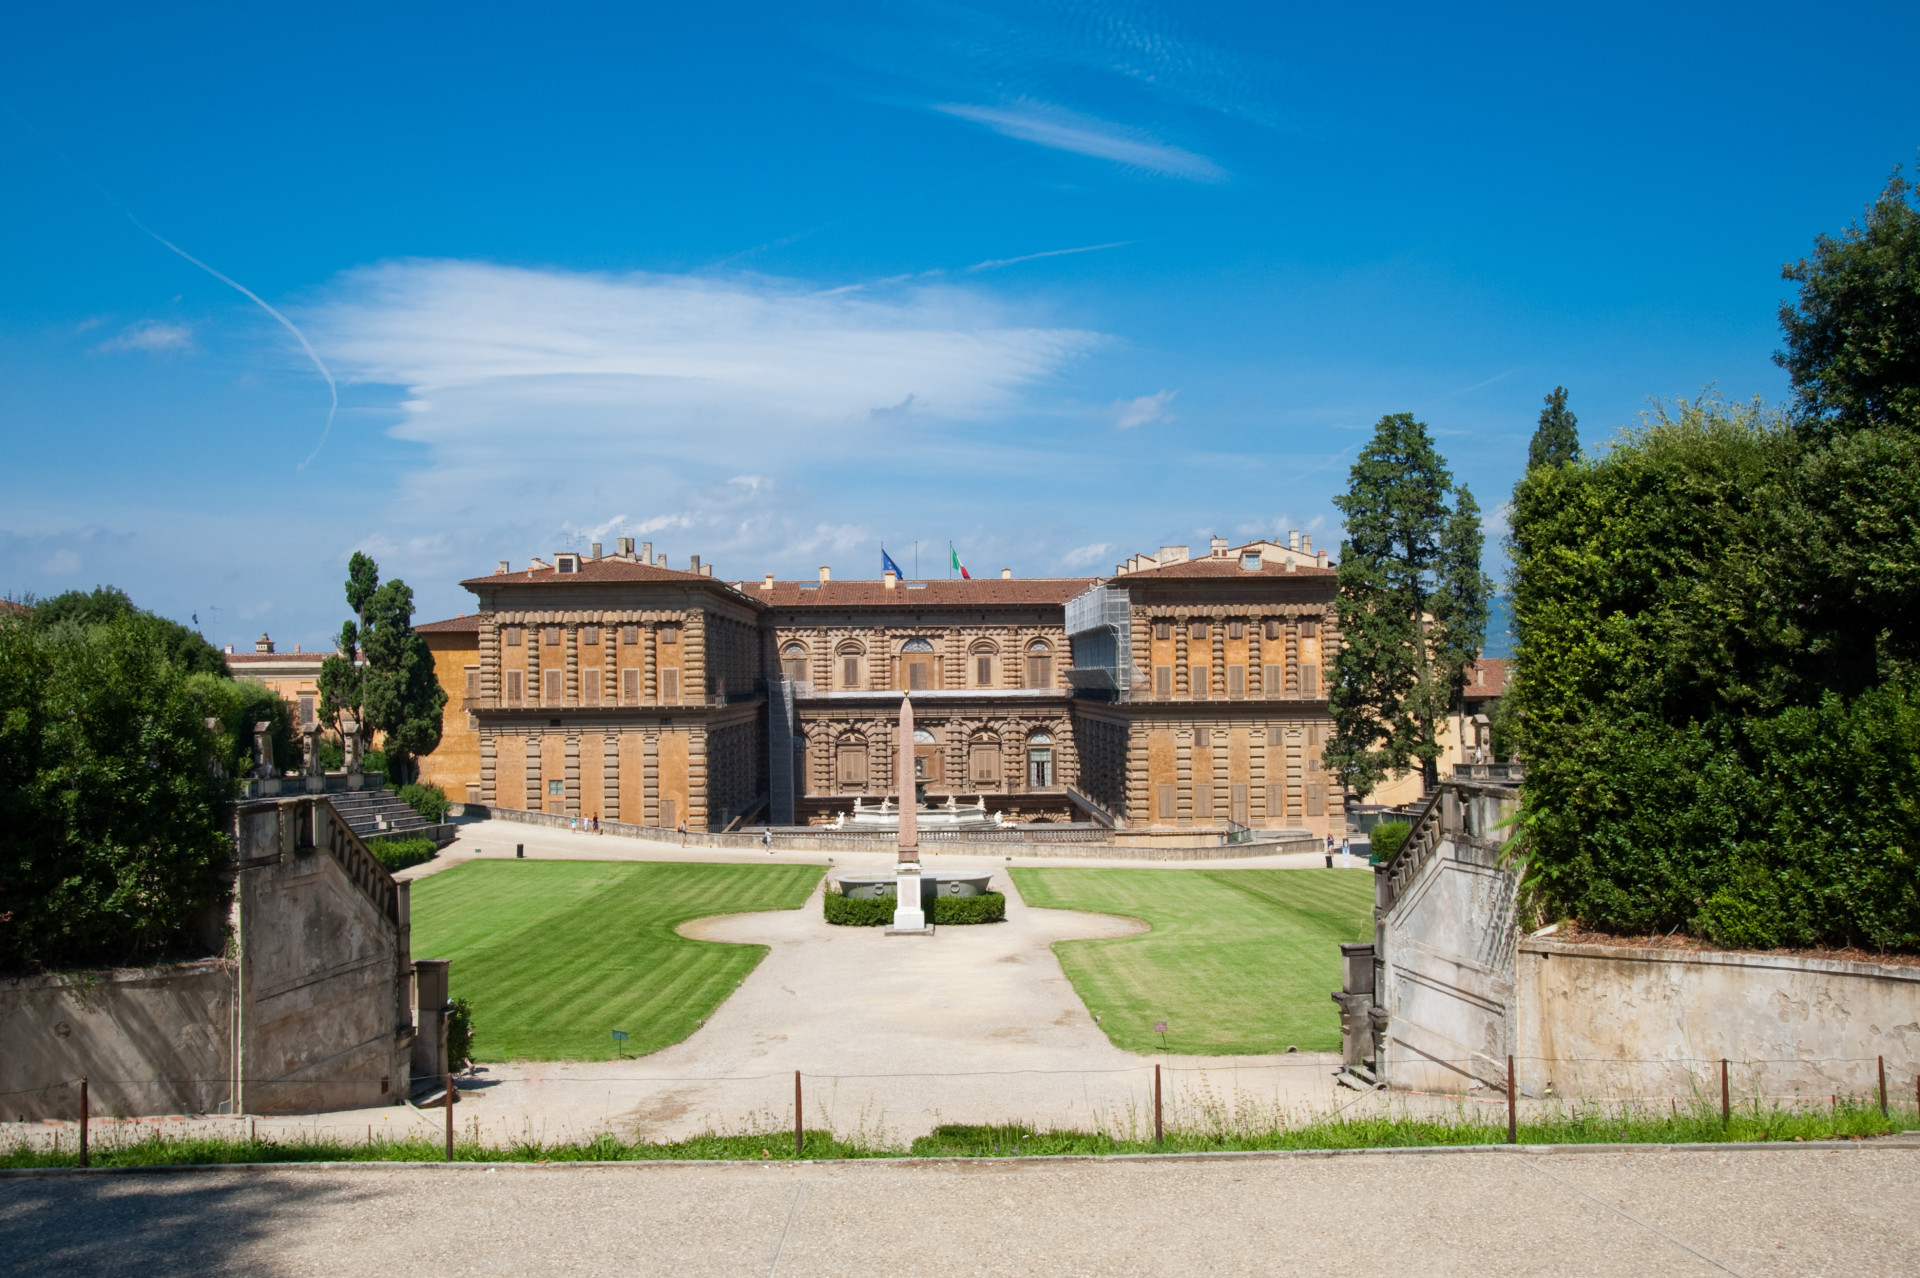 Our special tip is to visit the Boboli Gardens, Florence's most famous park, and the perfect spot for a relaxing stroll. <p>You may also like:<a href="https://www.starsinsider.com/n/77667?utm_source=msn.com&utm_medium=display&utm_campaign=referral_description&utm_content=208346v2en-sg"> 30 facts you probably didn't know about the world </a></p>